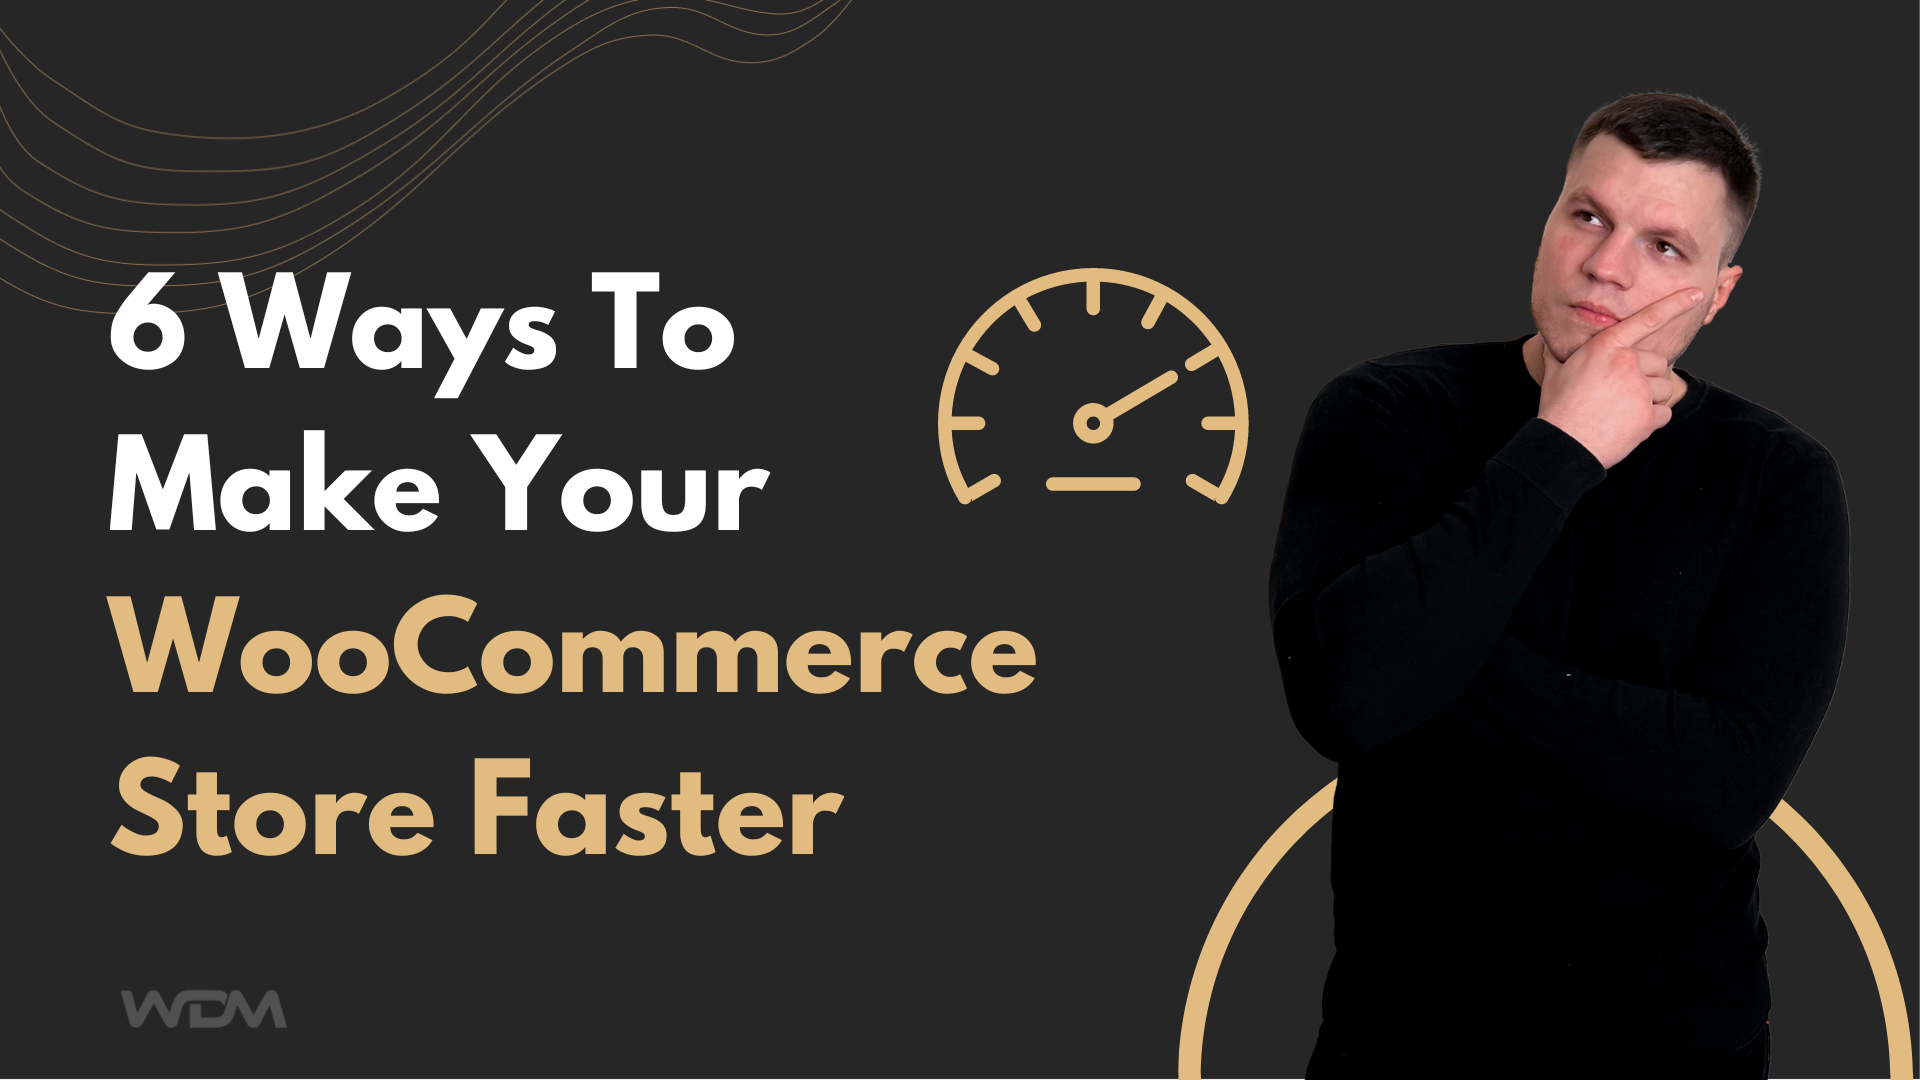 Make Your WooCommerce Store Faster